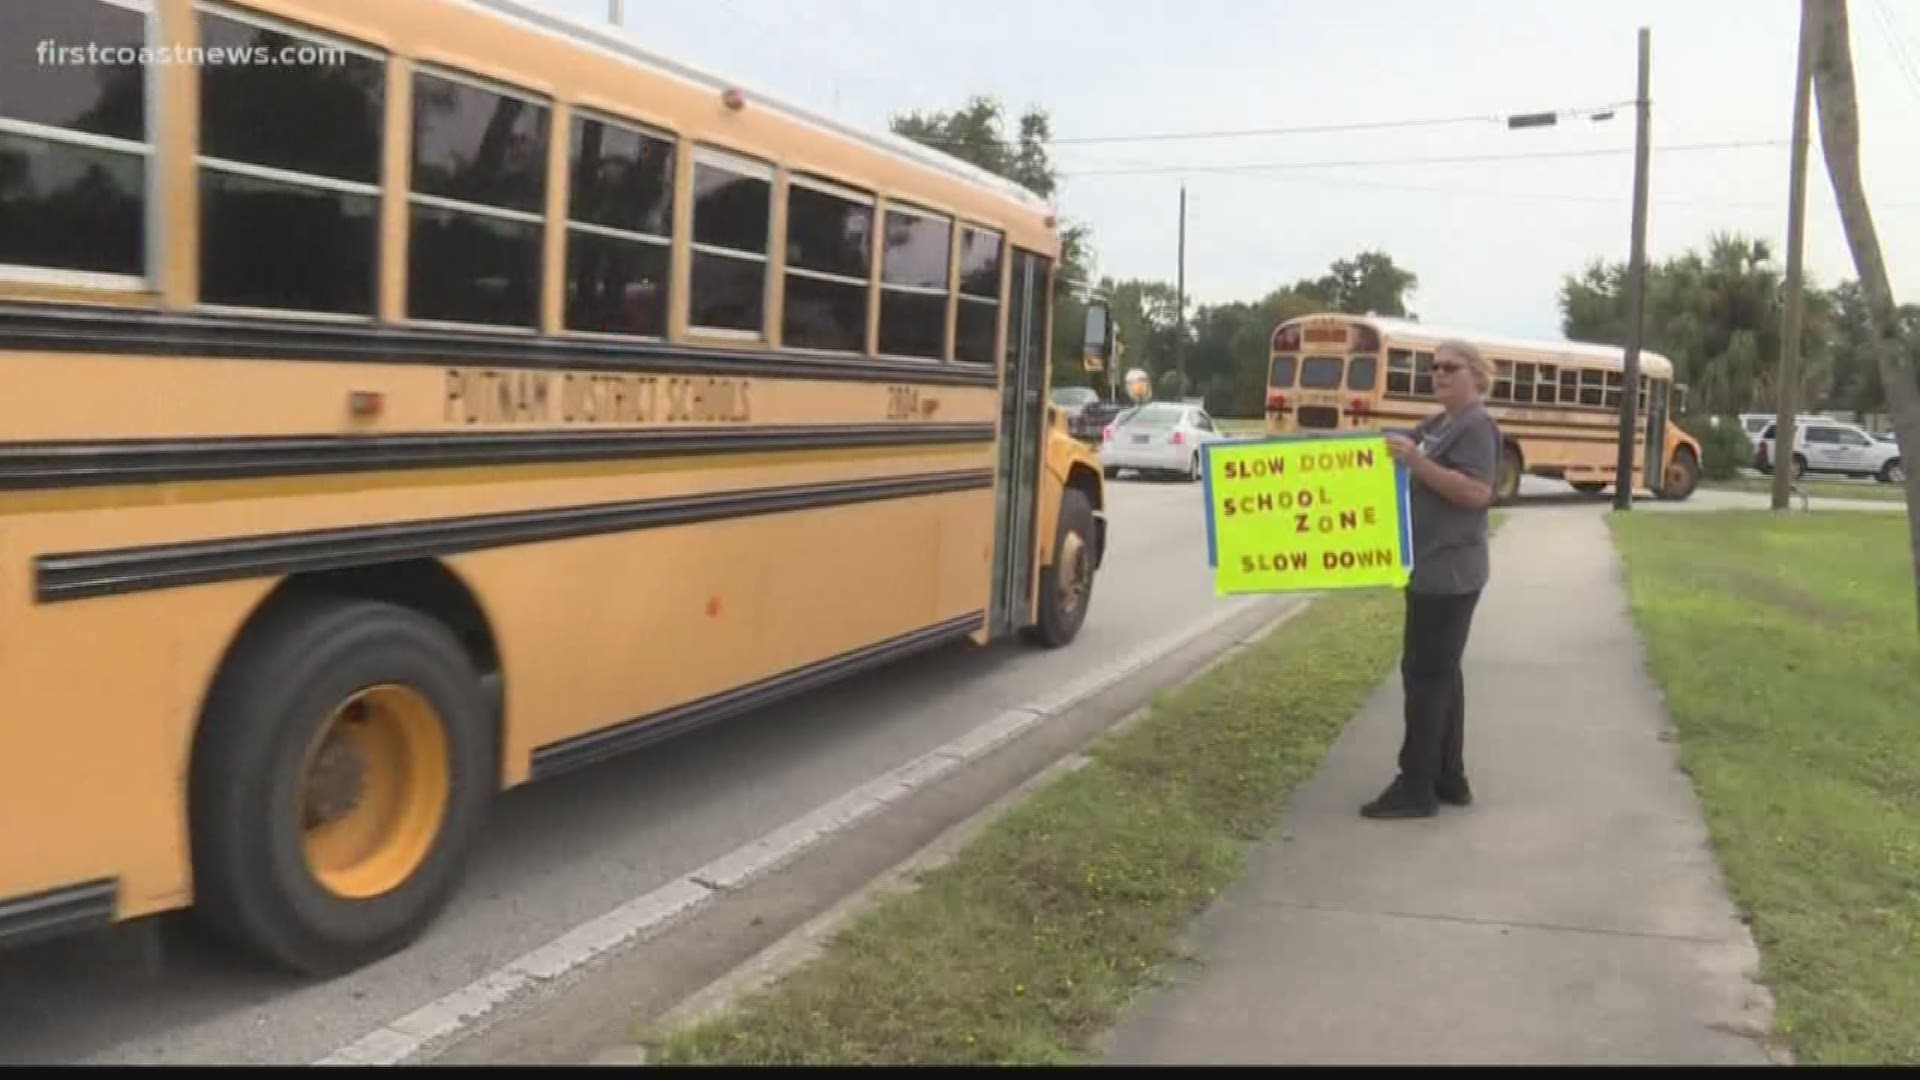 The Putnam Academy of Arts and Sciences Charter School is near the school zone and one grandmother says she's doing her part to insure drivers slow down.